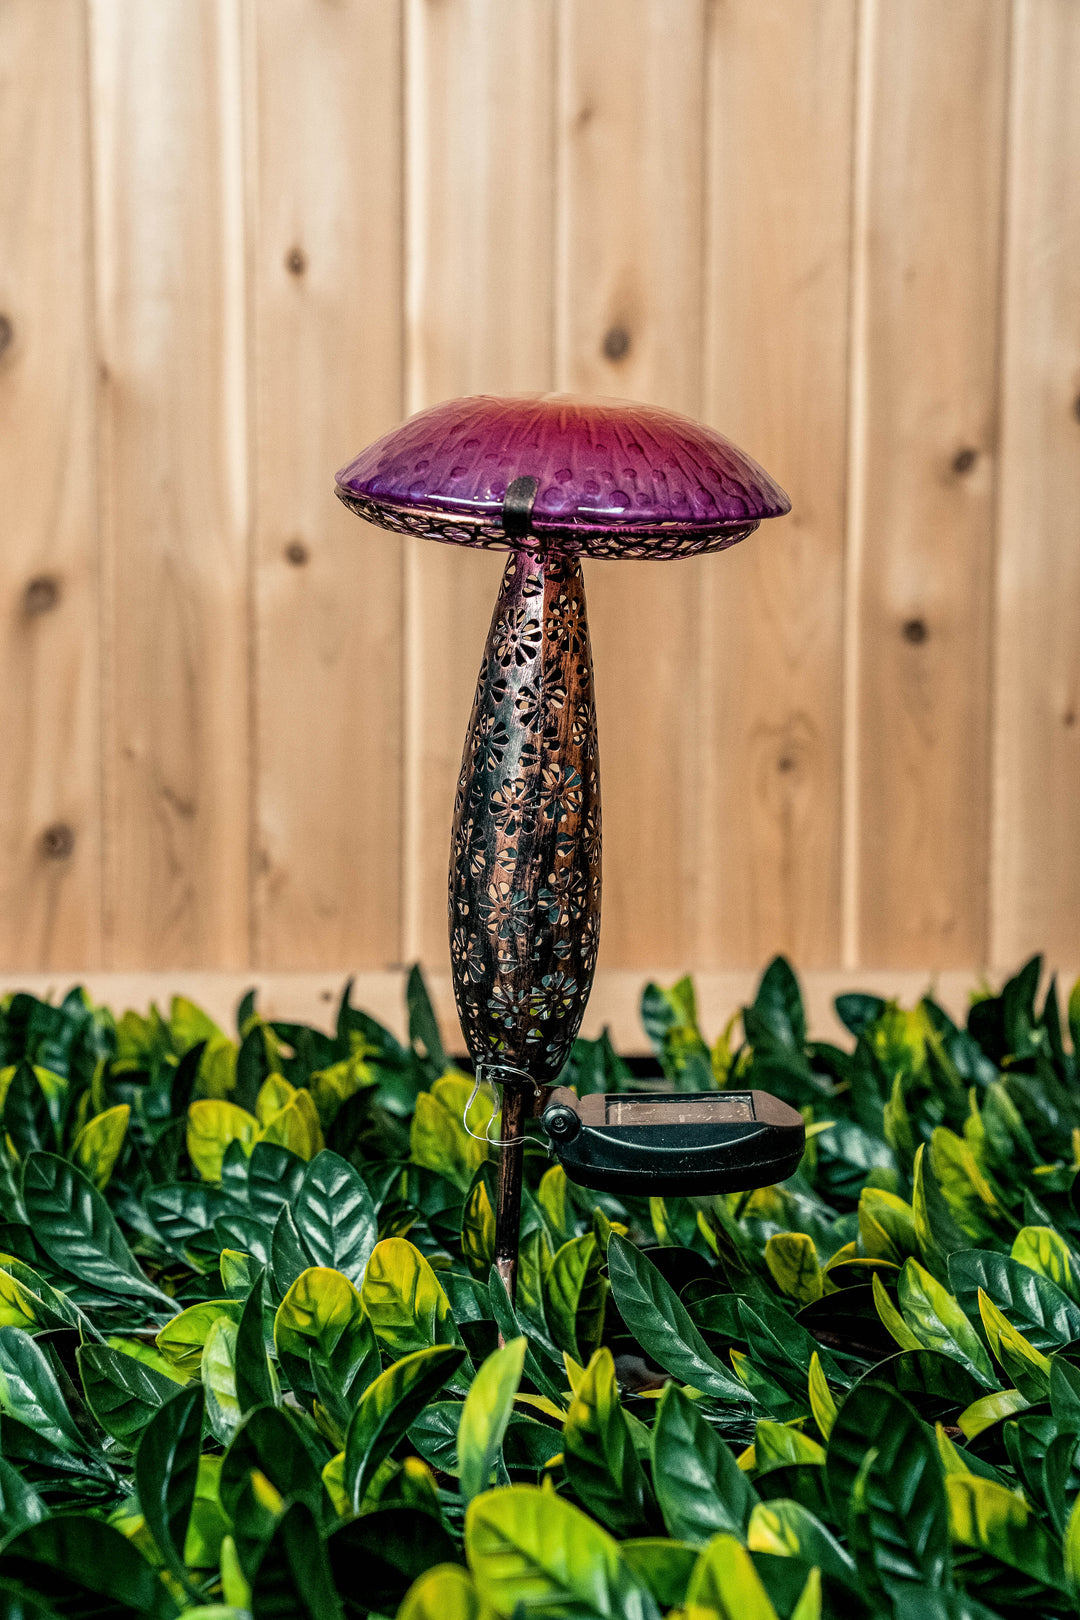 Metal And Glass Solar Mushroom Stake With Led - Pink And Purple HI-LINE GIFT LTD.